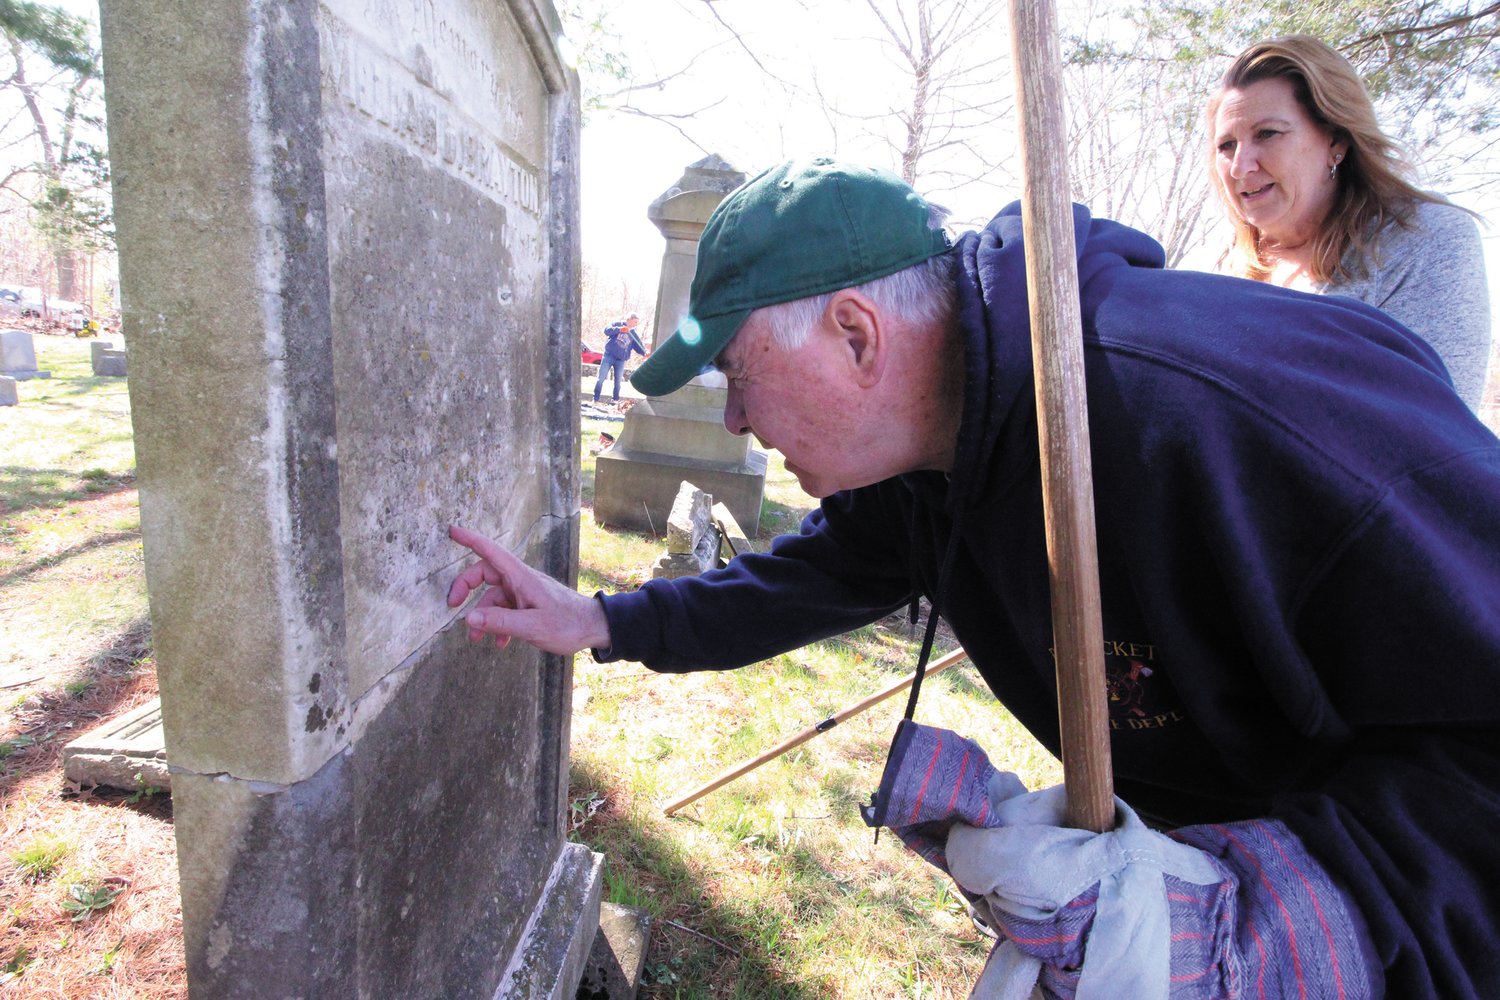 He knows are the bodies are buried 
Retired Supreme Court Justice and former Warwick Mayor Francis Flaherty joined fellow Warwick Historic Cemeteries Commission members and volunteers Saturday for the spring cleaning of the Brayton Cemetery in Apponaug. Flaherty seen here with Susan Cabeceiras reads the inscription on the William Brayton who served as a Rhode Island Congressman from 1856 to 1860.  Flaherty will give a talk on the Braytons at the May 14 event at the cemetery that includes a scavenger hunt.